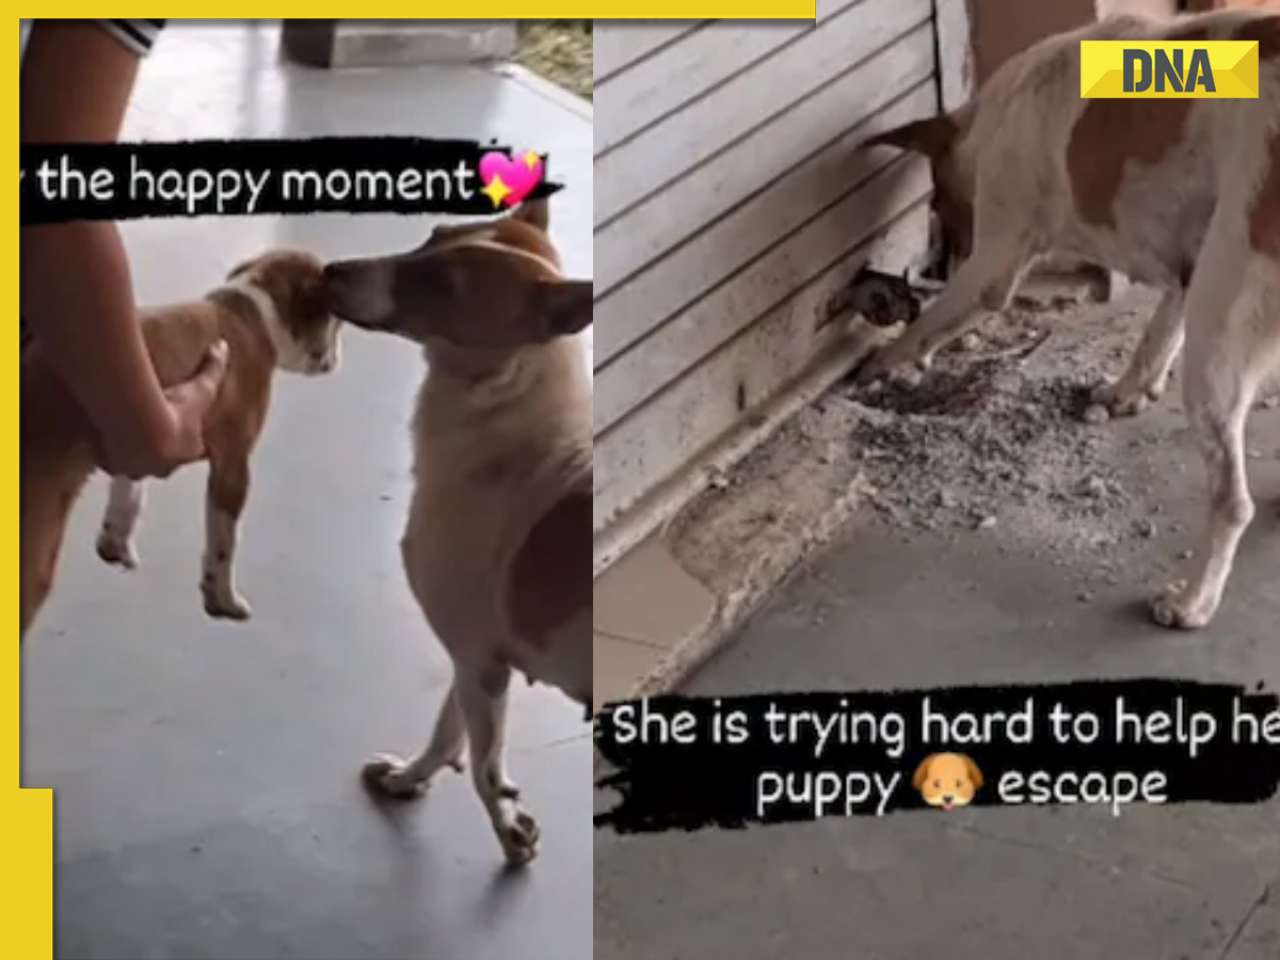 Puppy reunites with mother after being stuck inside shop, viral video wins internet